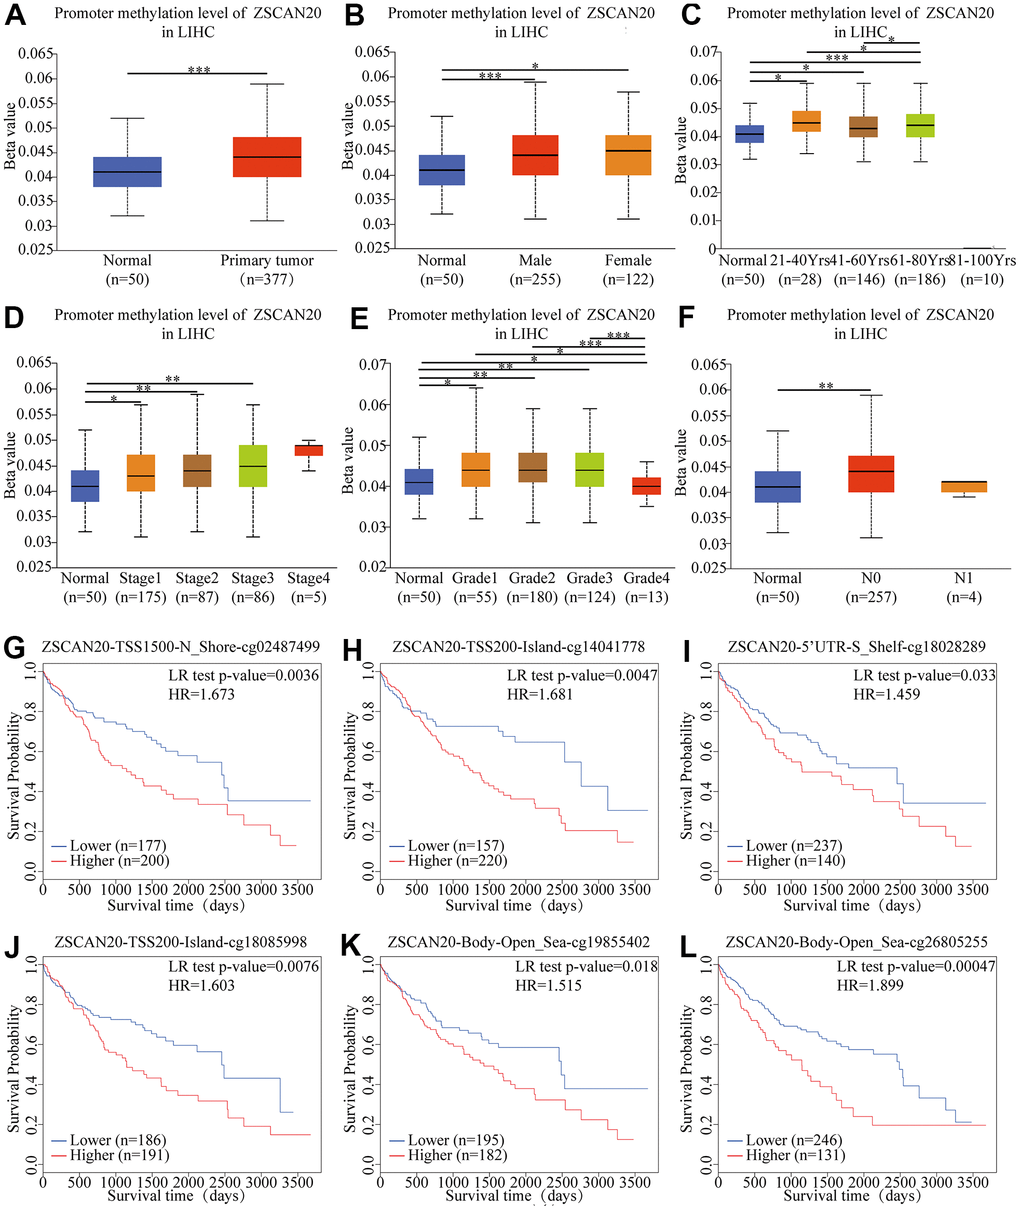 Correlation between ZSCAN20 promoter methylation level and prognostic value of DNA methylation in HCC. (A) normal vs primary tumor, (B) gender, (C) age, (D) cancer stage, (E) tumor grade, (F) lymph node metastasis status; *P P P G), cg14041778 (H), cg18028289 (I), cg18085998 (J), cg19855402 (K) and cg26805255 (L) correlated with worse OS.